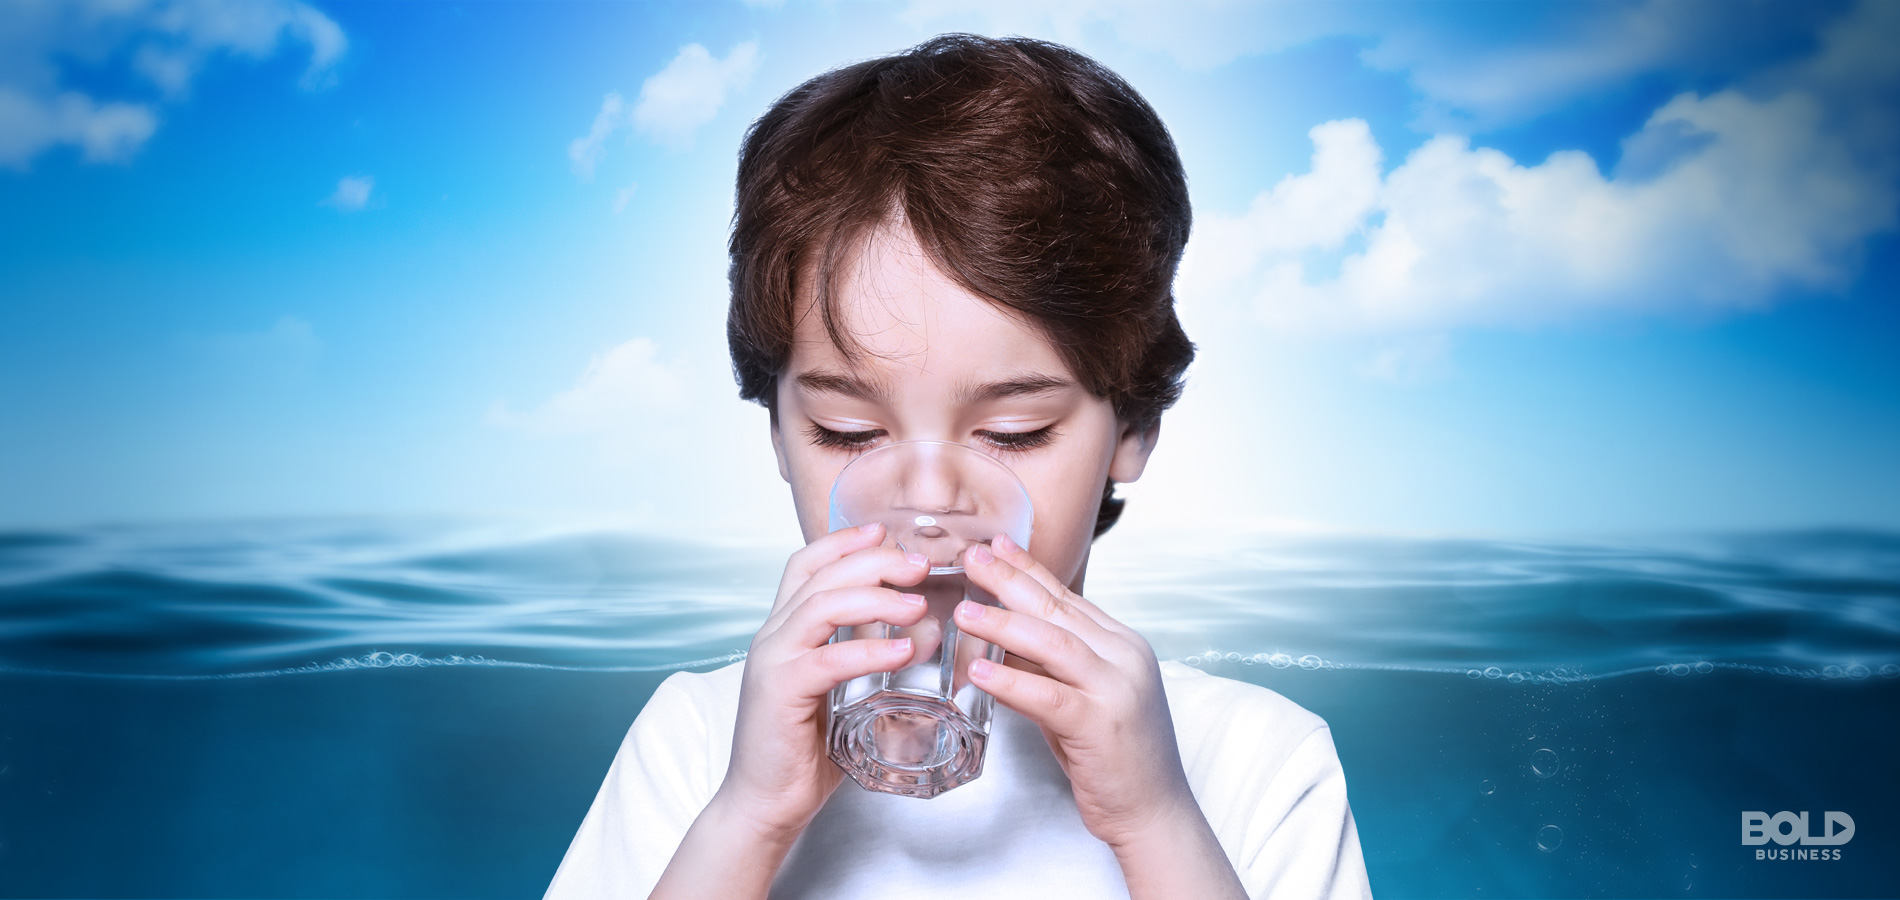 water desalination, child drinking water with the ocean as background